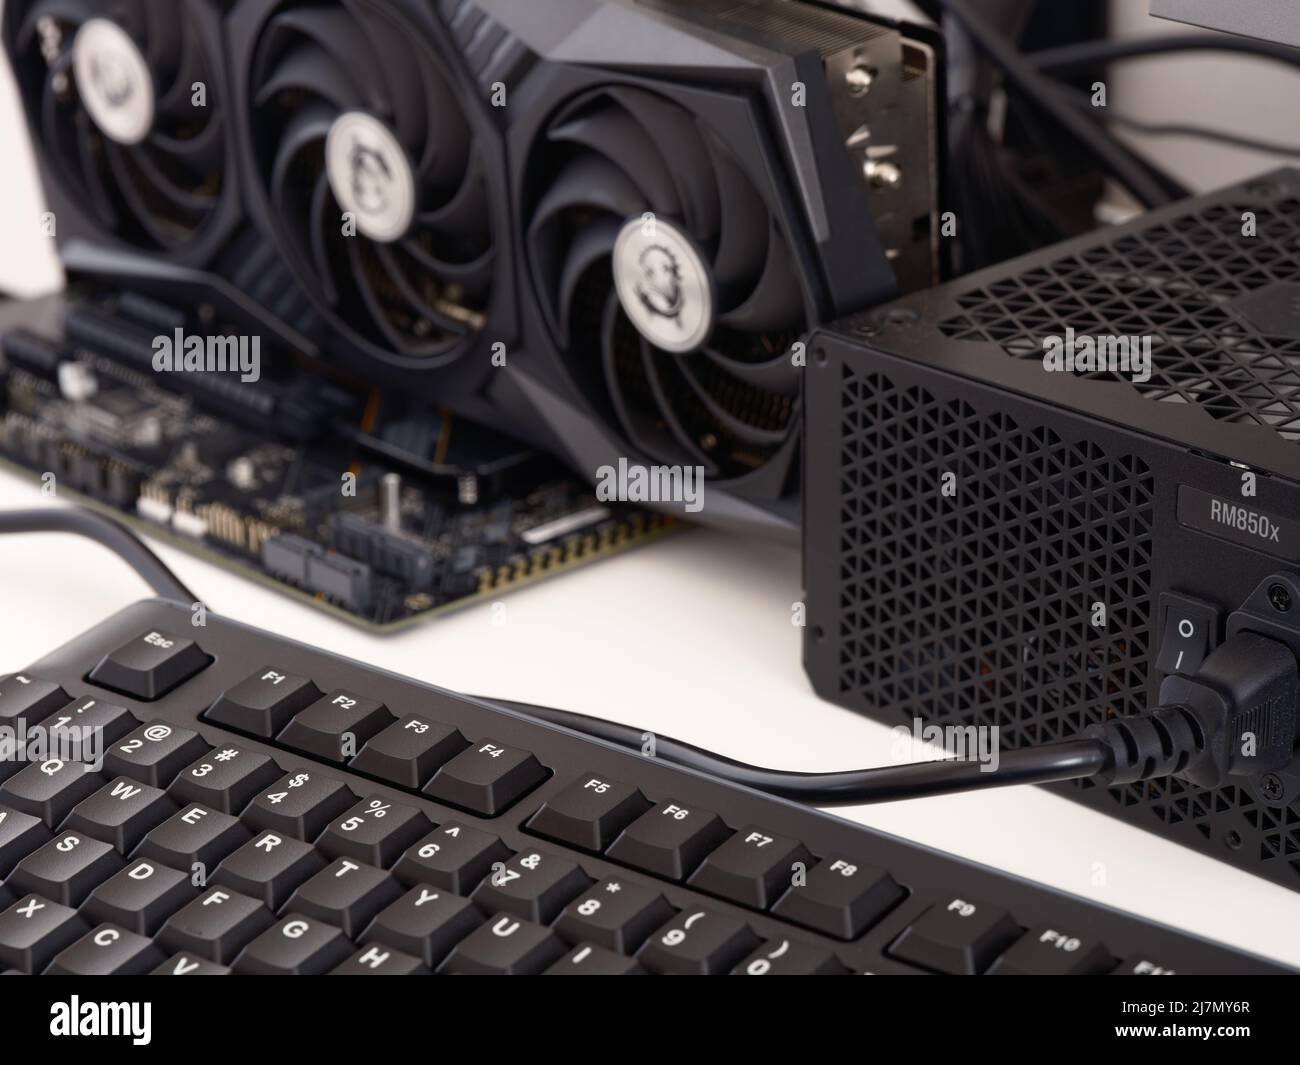 Tambov, Russian Federation - May 02, 2022 A mining rig with an MSI Nvidia  Geforce RTX 3070 Ti graphics card. Close up Stock Photo - Alamy